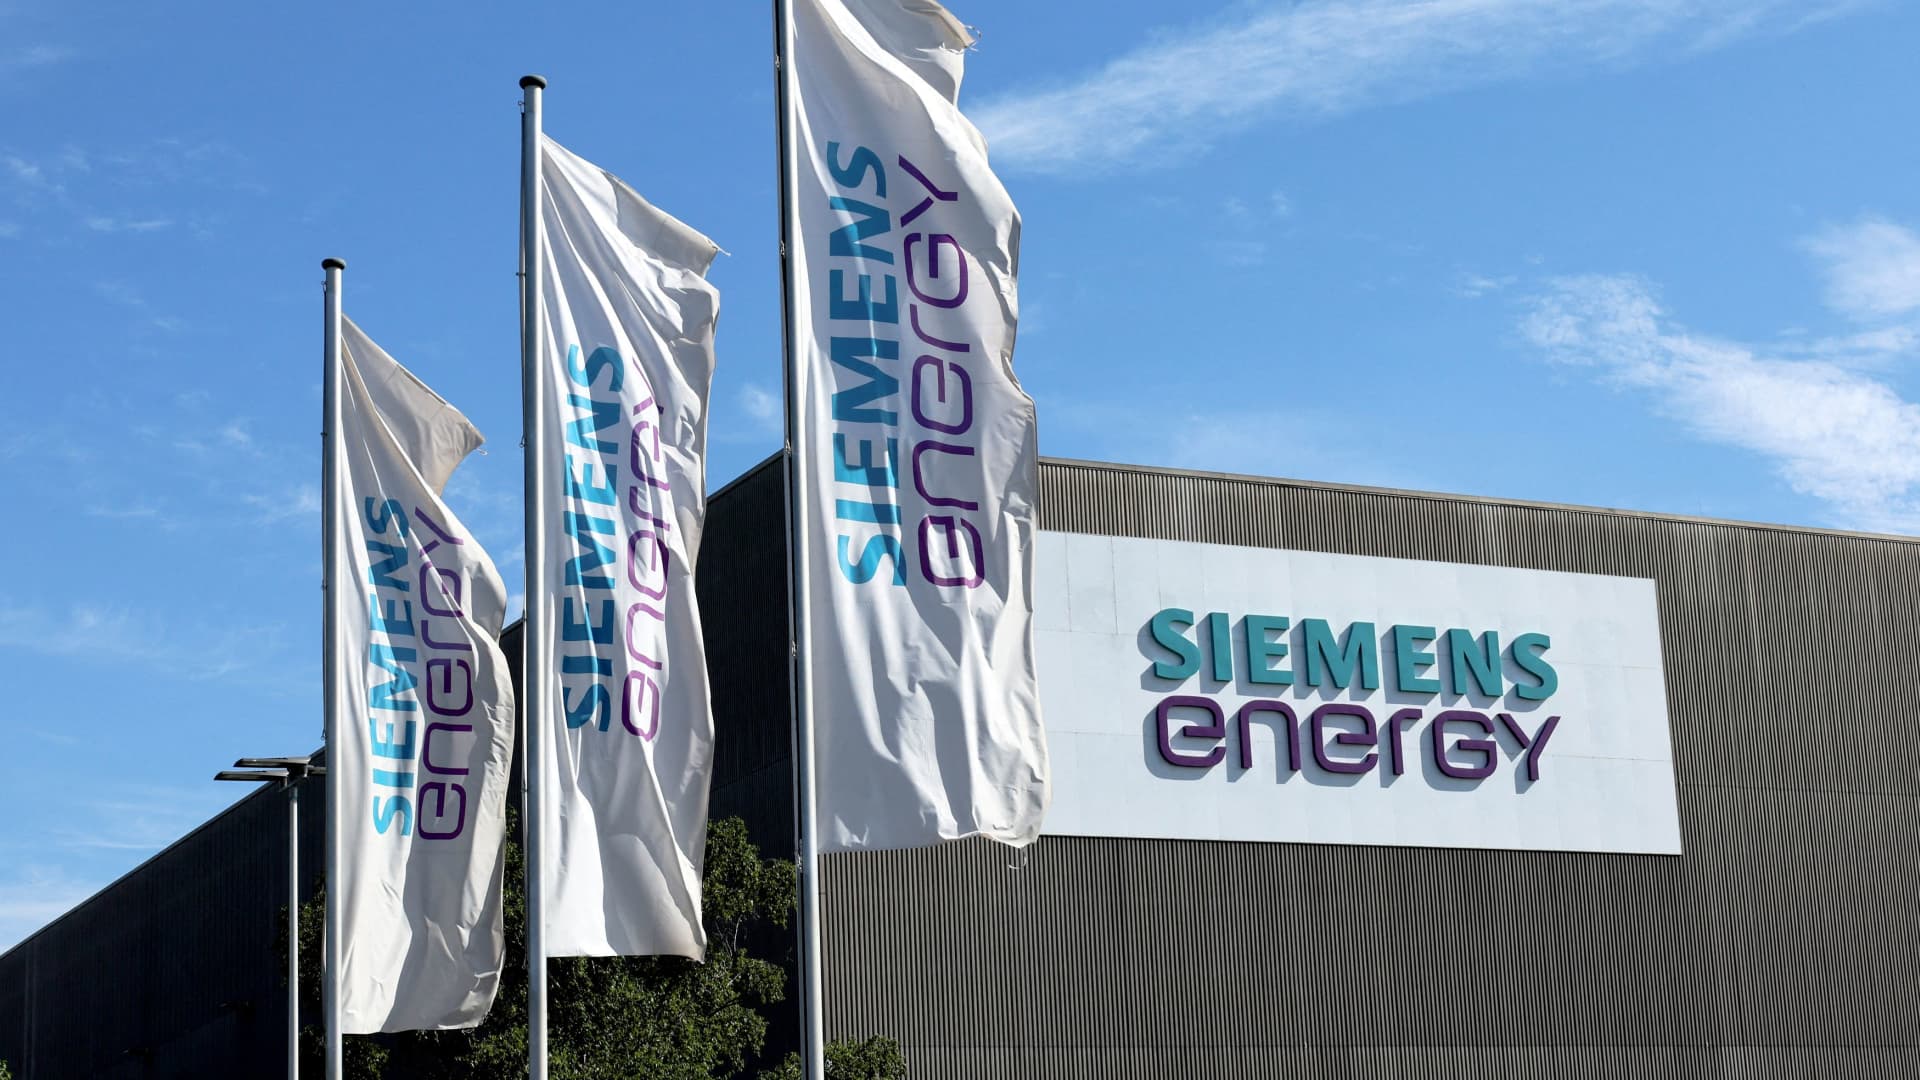 Siemens Energy clinches voice ensures because it posts a 4.6 billion euro annual loss